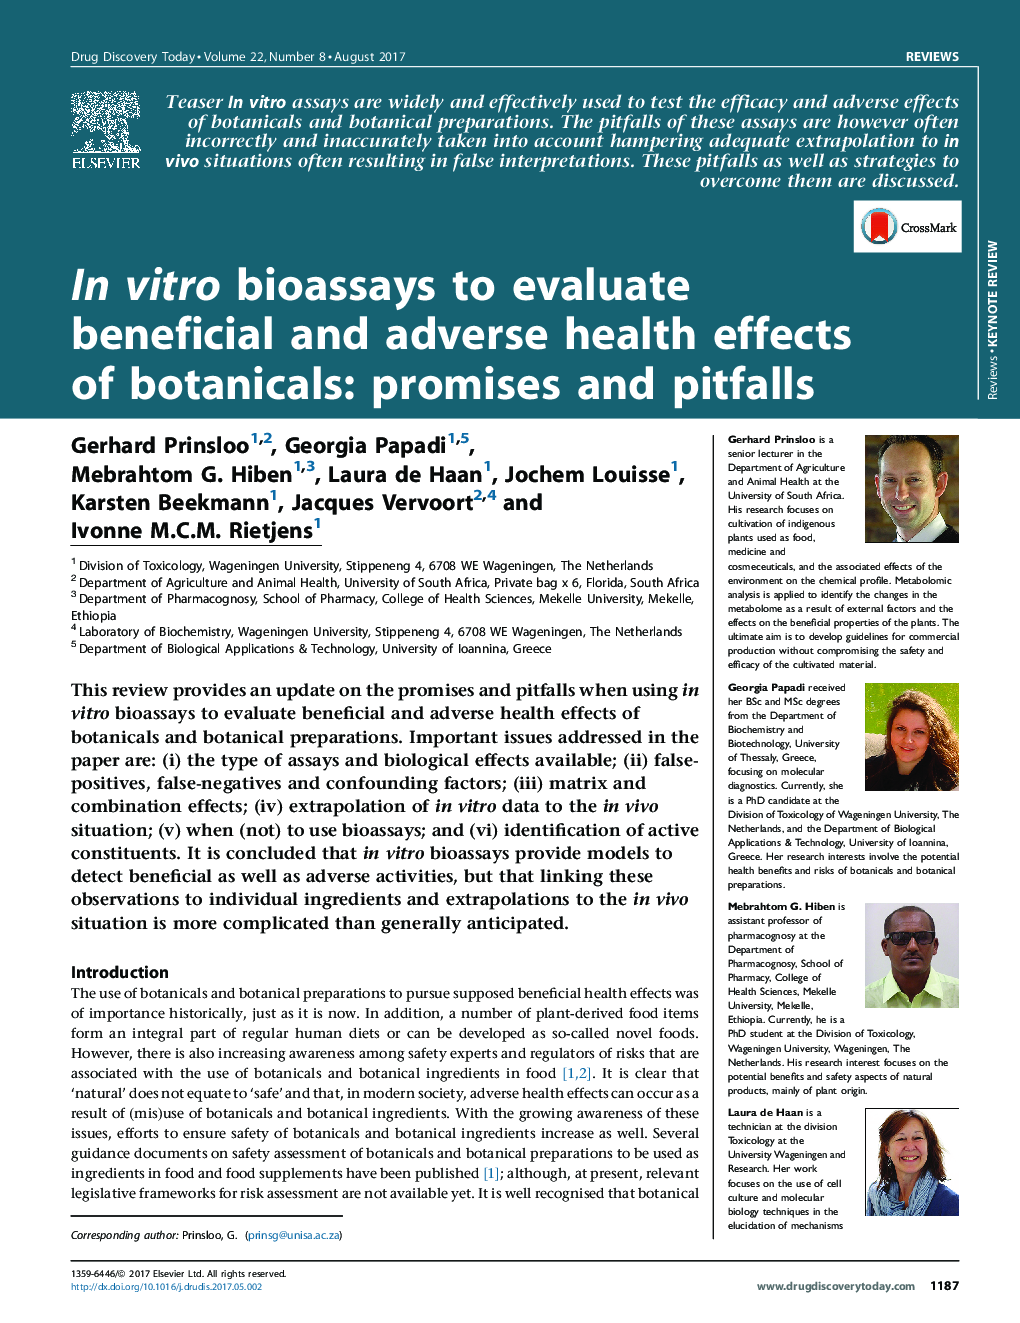 ReviewKeynoteIn vitro bioassays to evaluate beneficial and adverse health effects of botanicals: promises and pitfalls